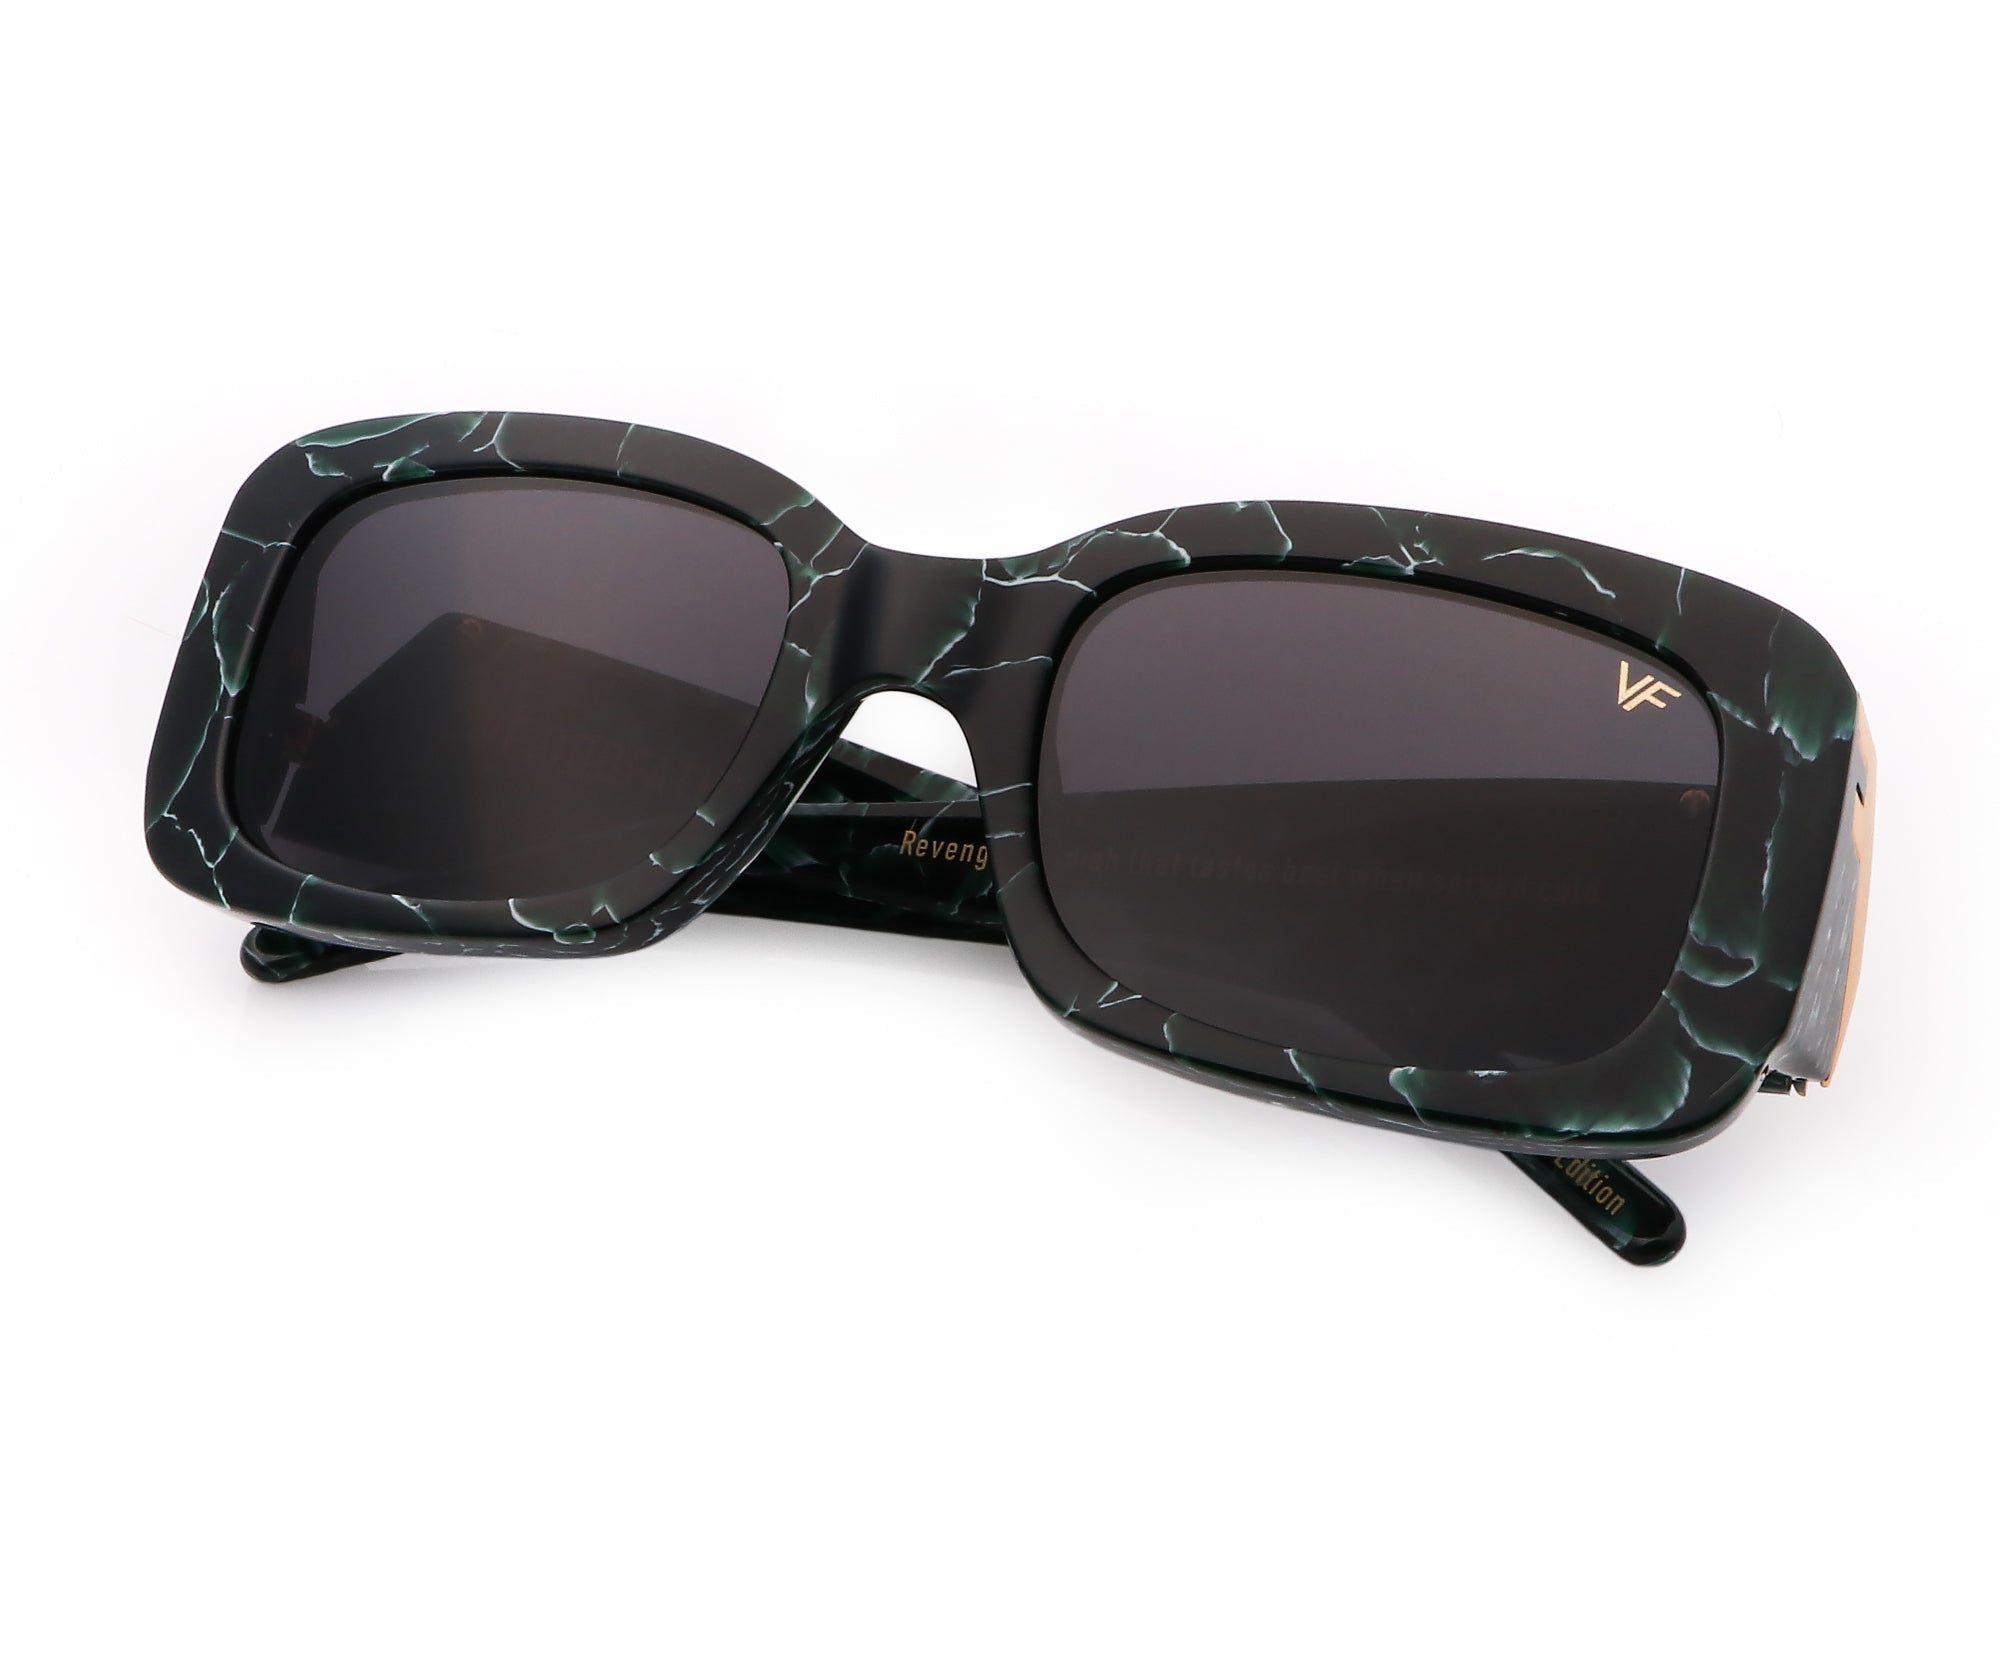 OFF WHITE x Sunglass Hut Drop their New Line of Sunglasses at